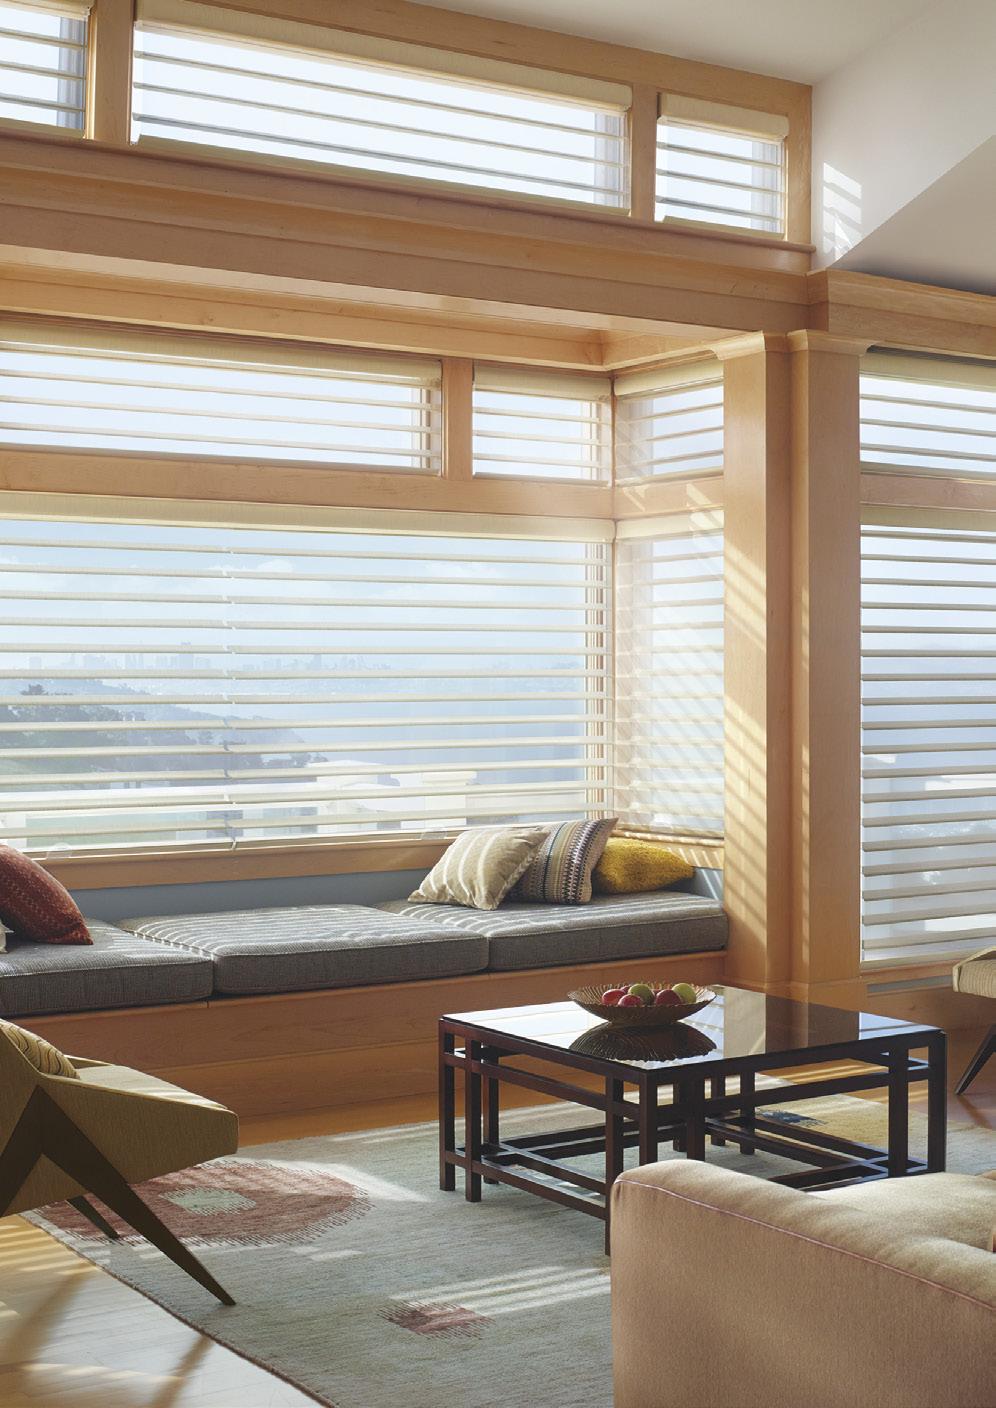 Luxaflex Silhouette Shadings Silhouette Shadings are made of 100% polyester, which means they are inherently durable and resilient.